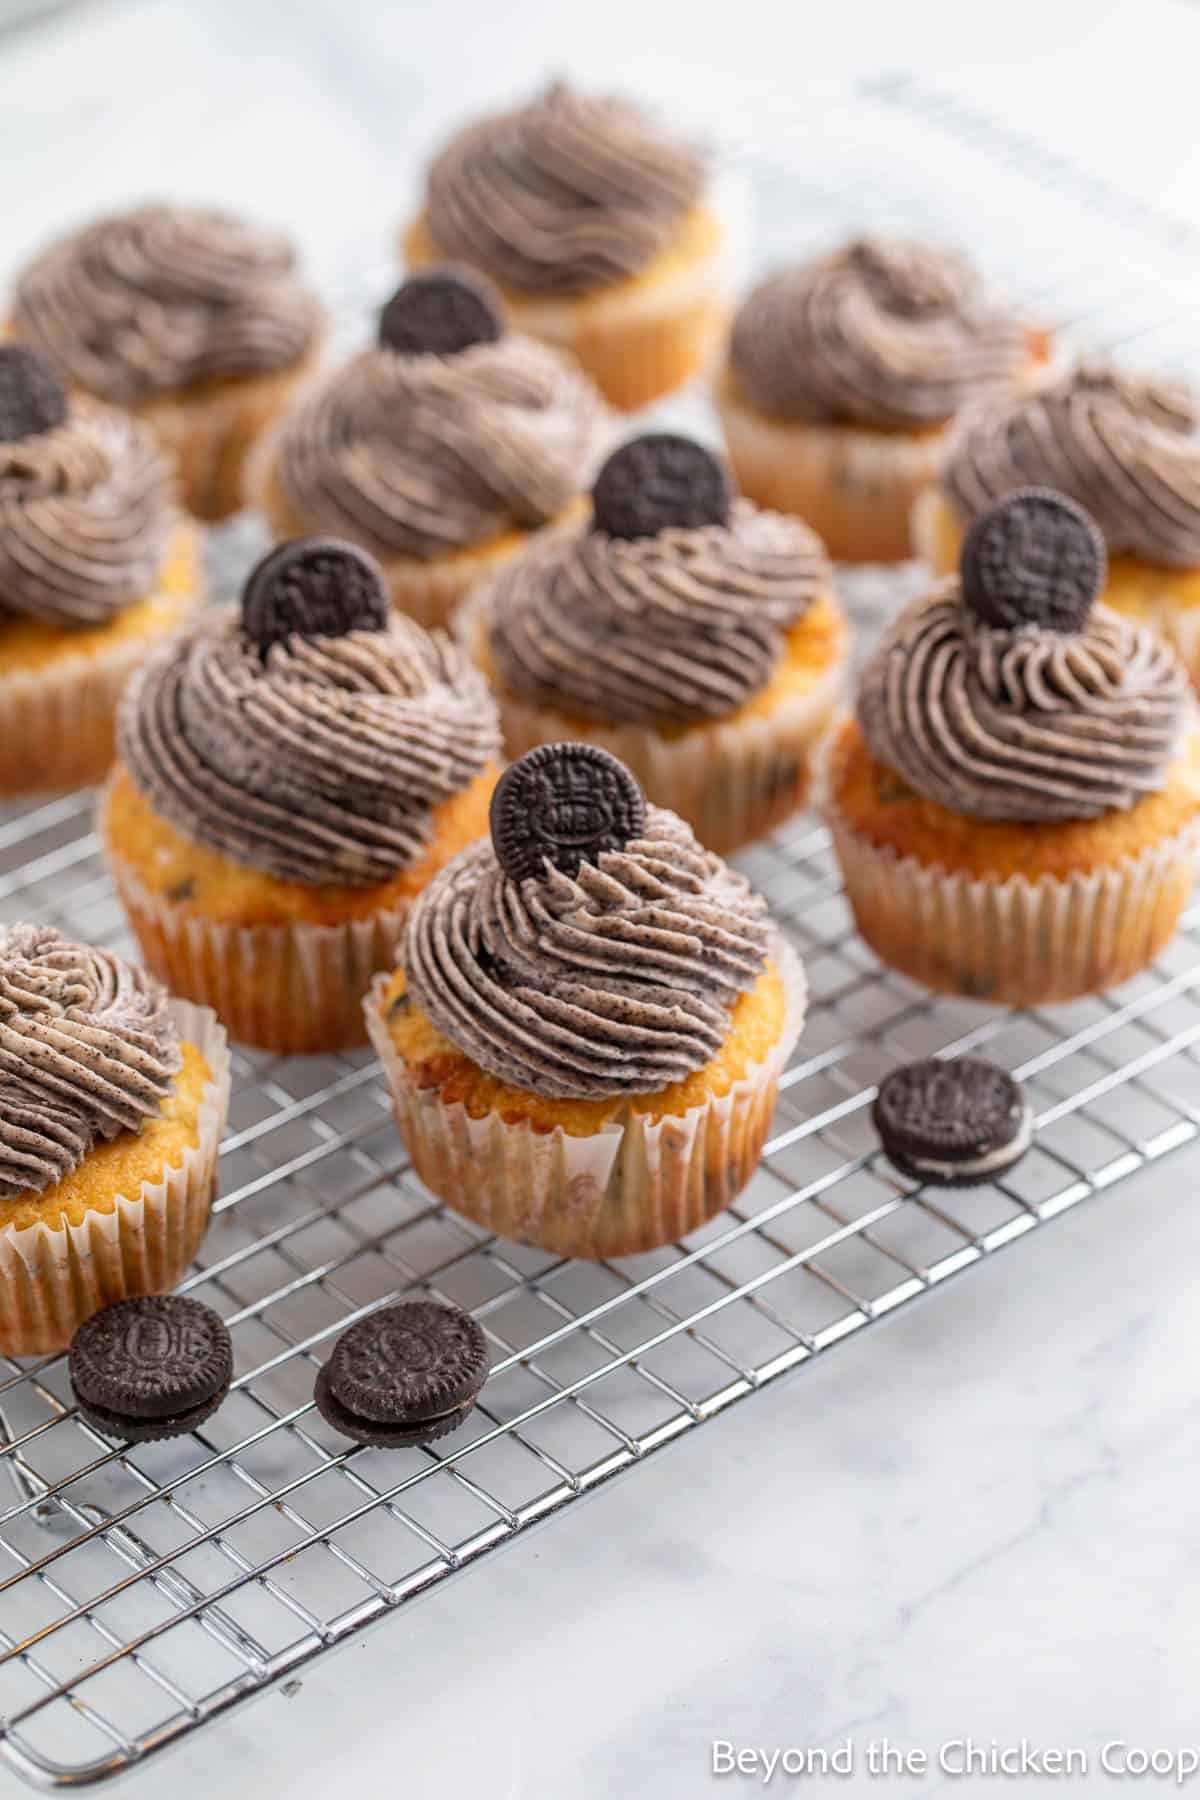 Cupcakes frosted with Oreo frosting. 